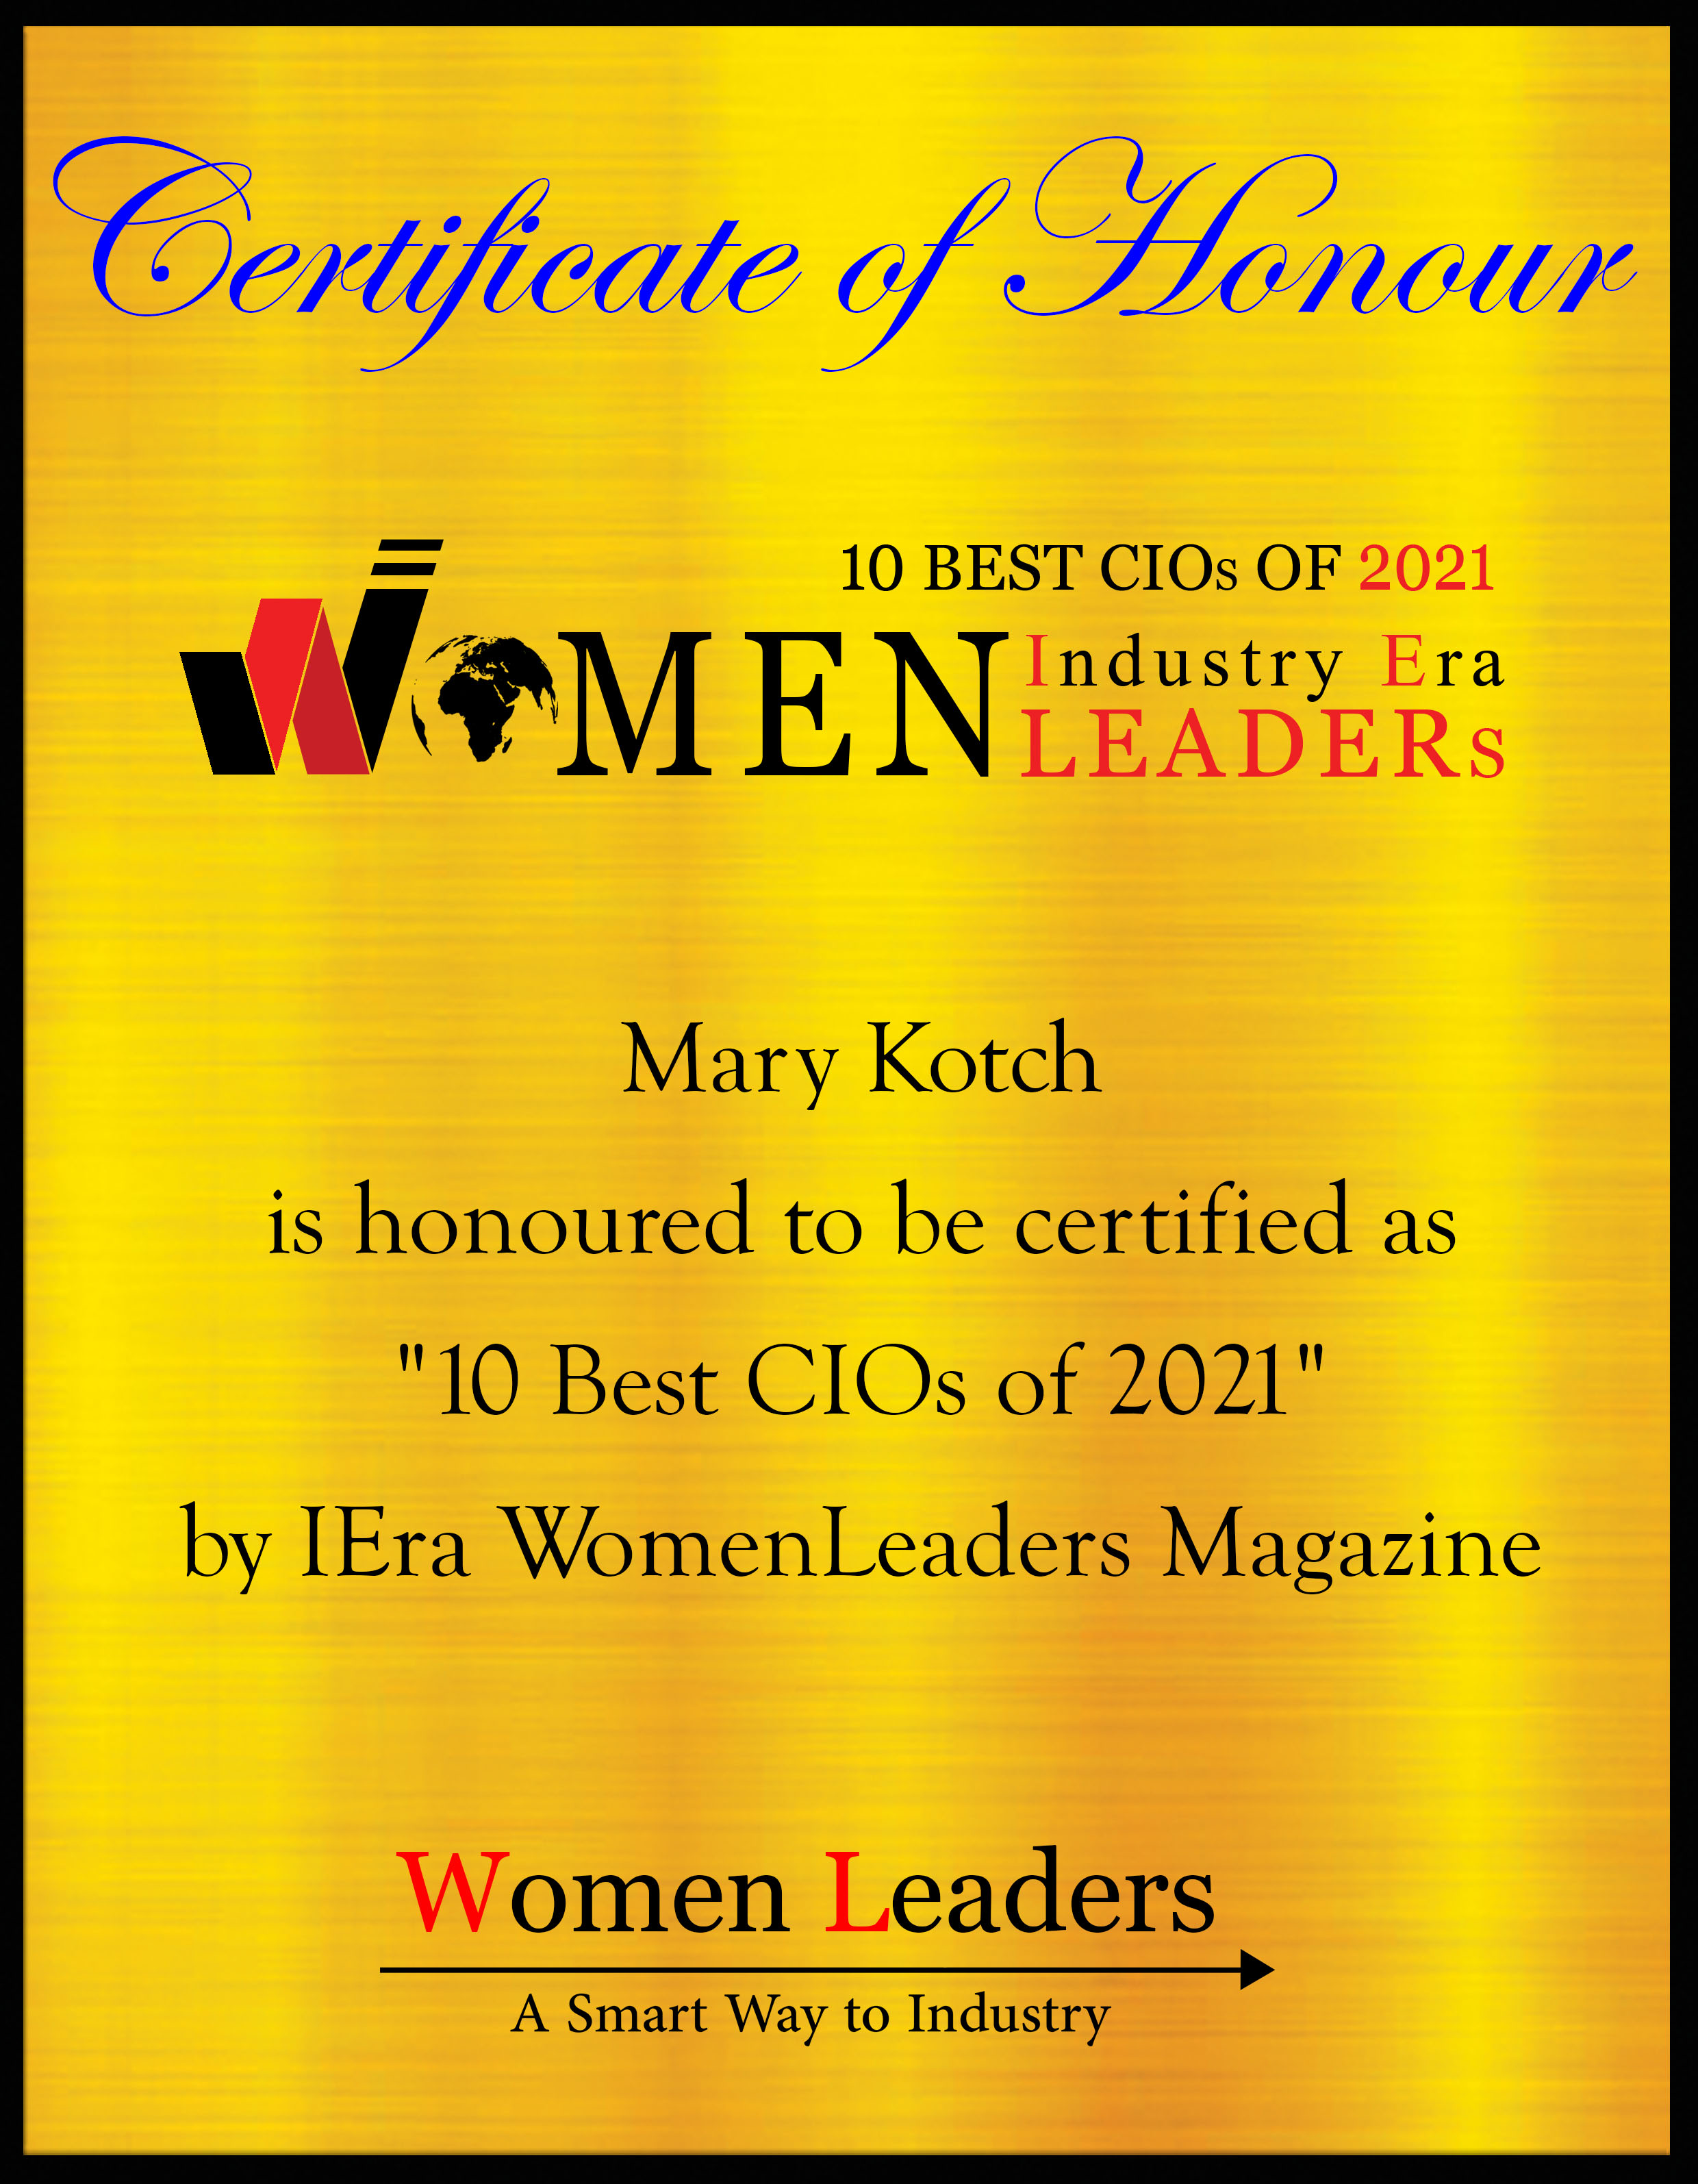 Mary Kotch, EVP & CIO of Core Specialty Insurance Holdings, Best CIOs of 2021